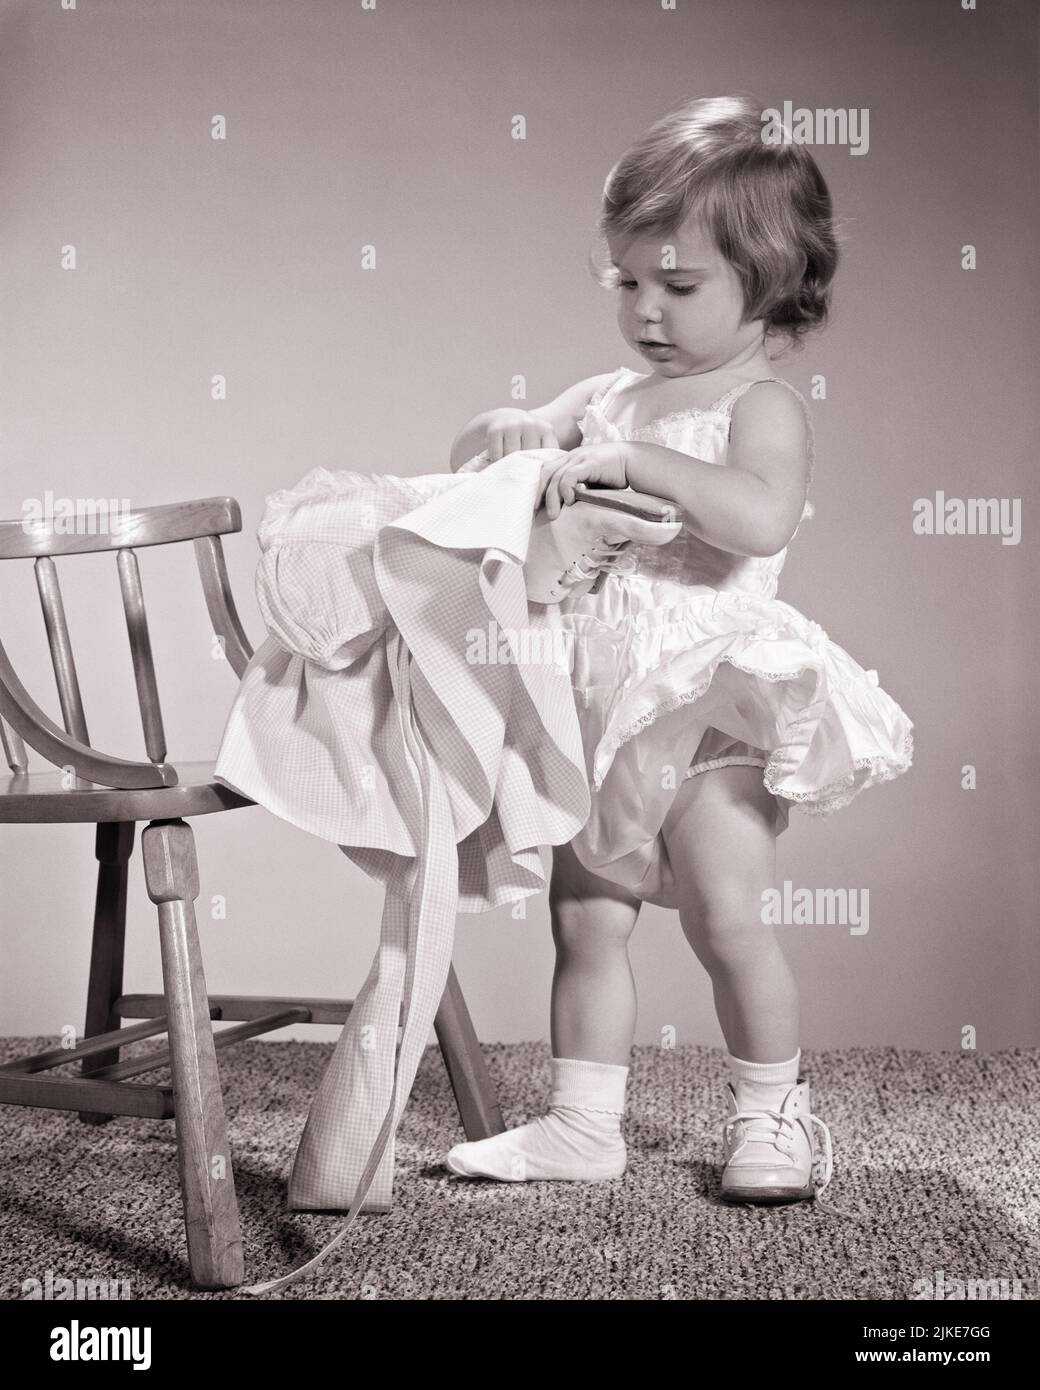 1960s TODDLER GIRL GETTING DRESSED AND PUTTING ON A DRESS AND SHOES ALL BY HERSELF - j1584 HAR001 HARS DISCOVERY AND EXCITEMENT TRYING PRIDE CONCEPTUAL STYLISH ATTEMPTING DETERMINED FOCUSED GROWTH HERSELF JUVENILES BABY GIRL BLACK AND WHITE CAUCASIAN ETHNICITY HAR001 OLD FASHIONED Stock Photo